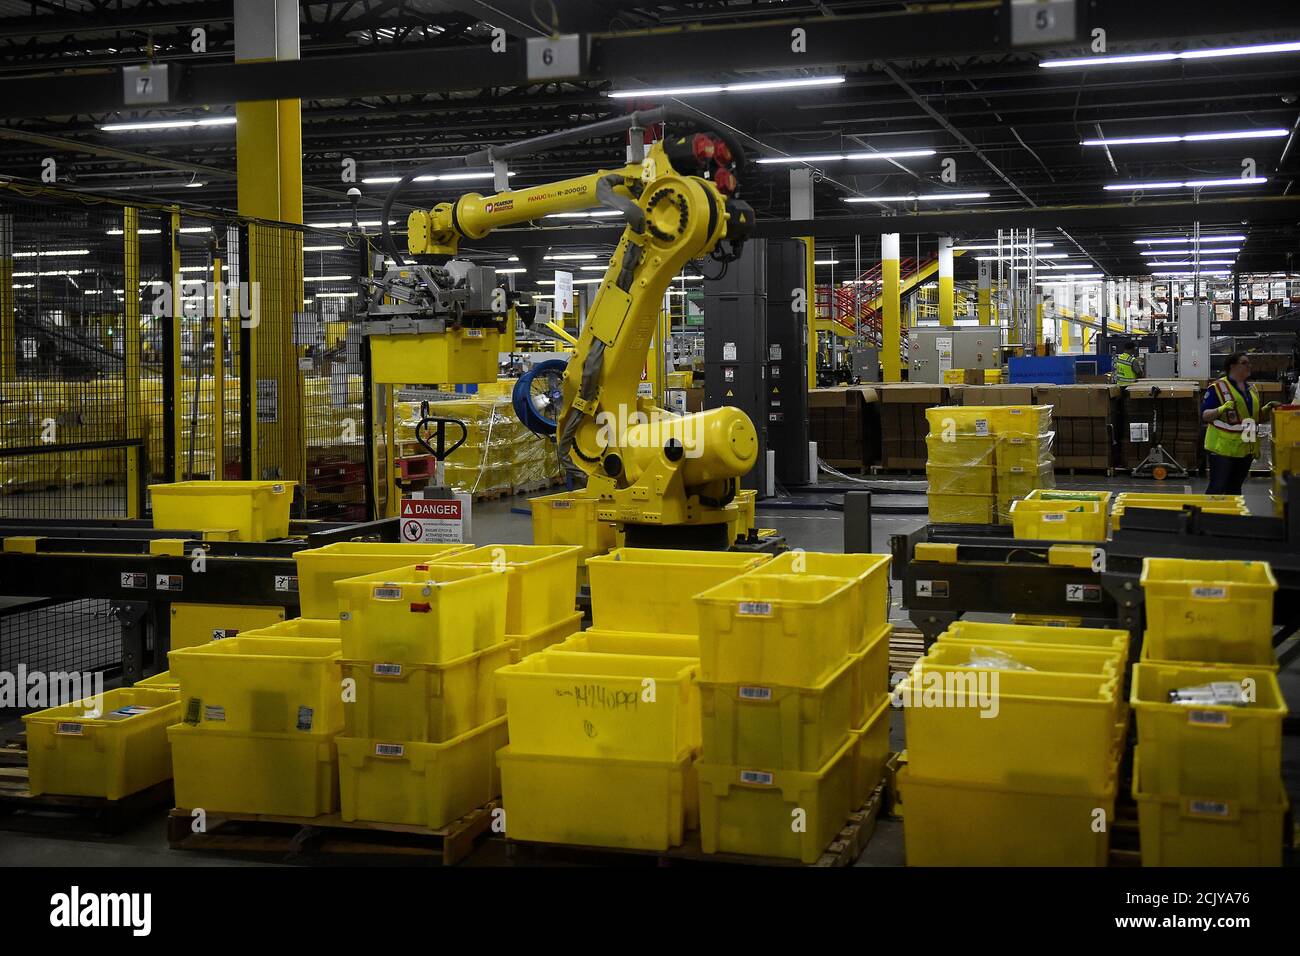 A 6-axis robotic arm picks up sorting containers at the Amazon fulfillment  center in Baltimore, Maryland, U.S., April 30, 2019. REUTERS/Clodagh  Kilcoyne Stock Photo - Alamy